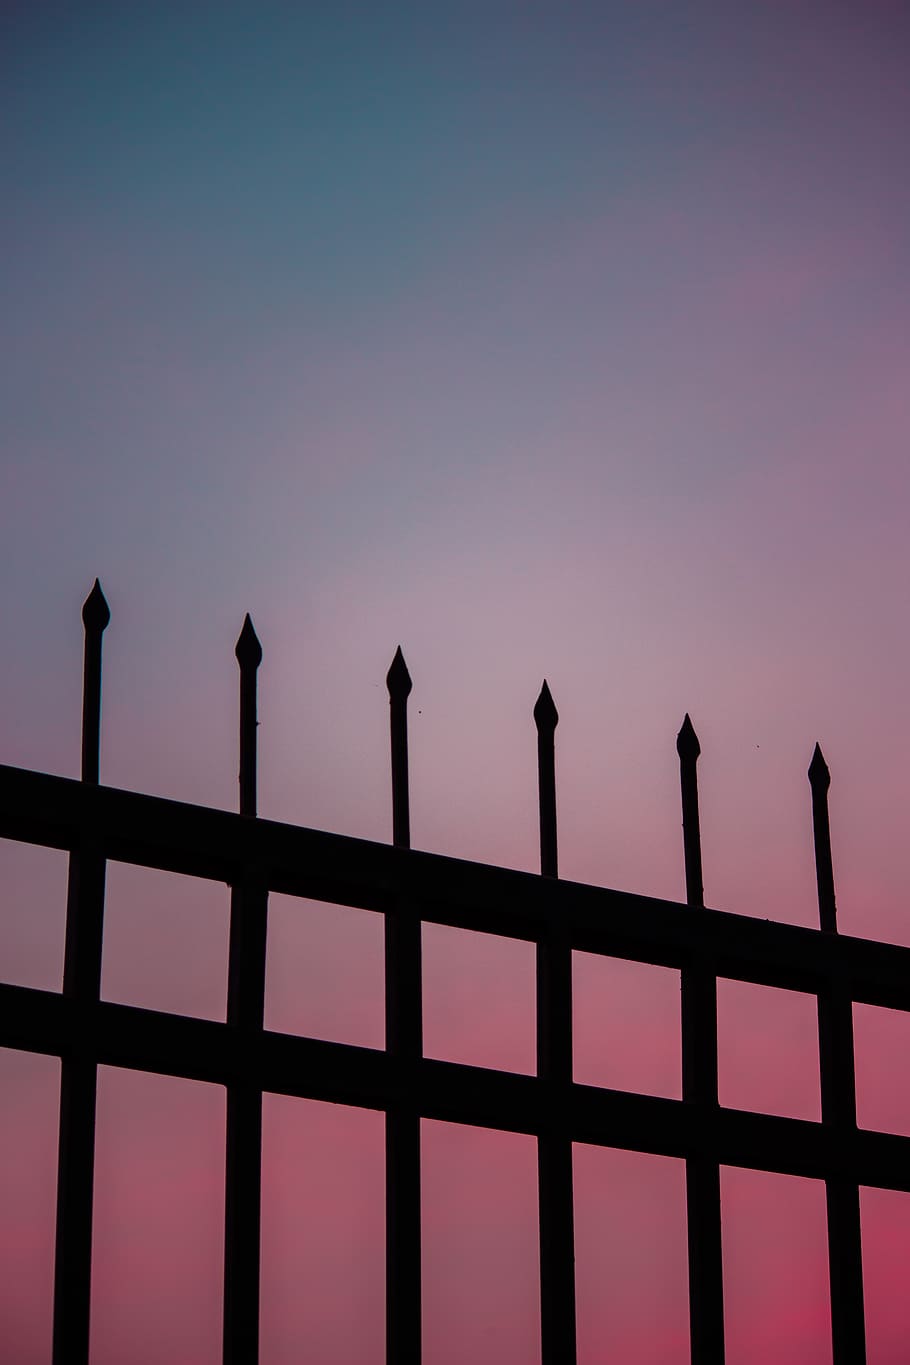 Silhouette of a fence against a pink and blue sky - Pastel minimalist